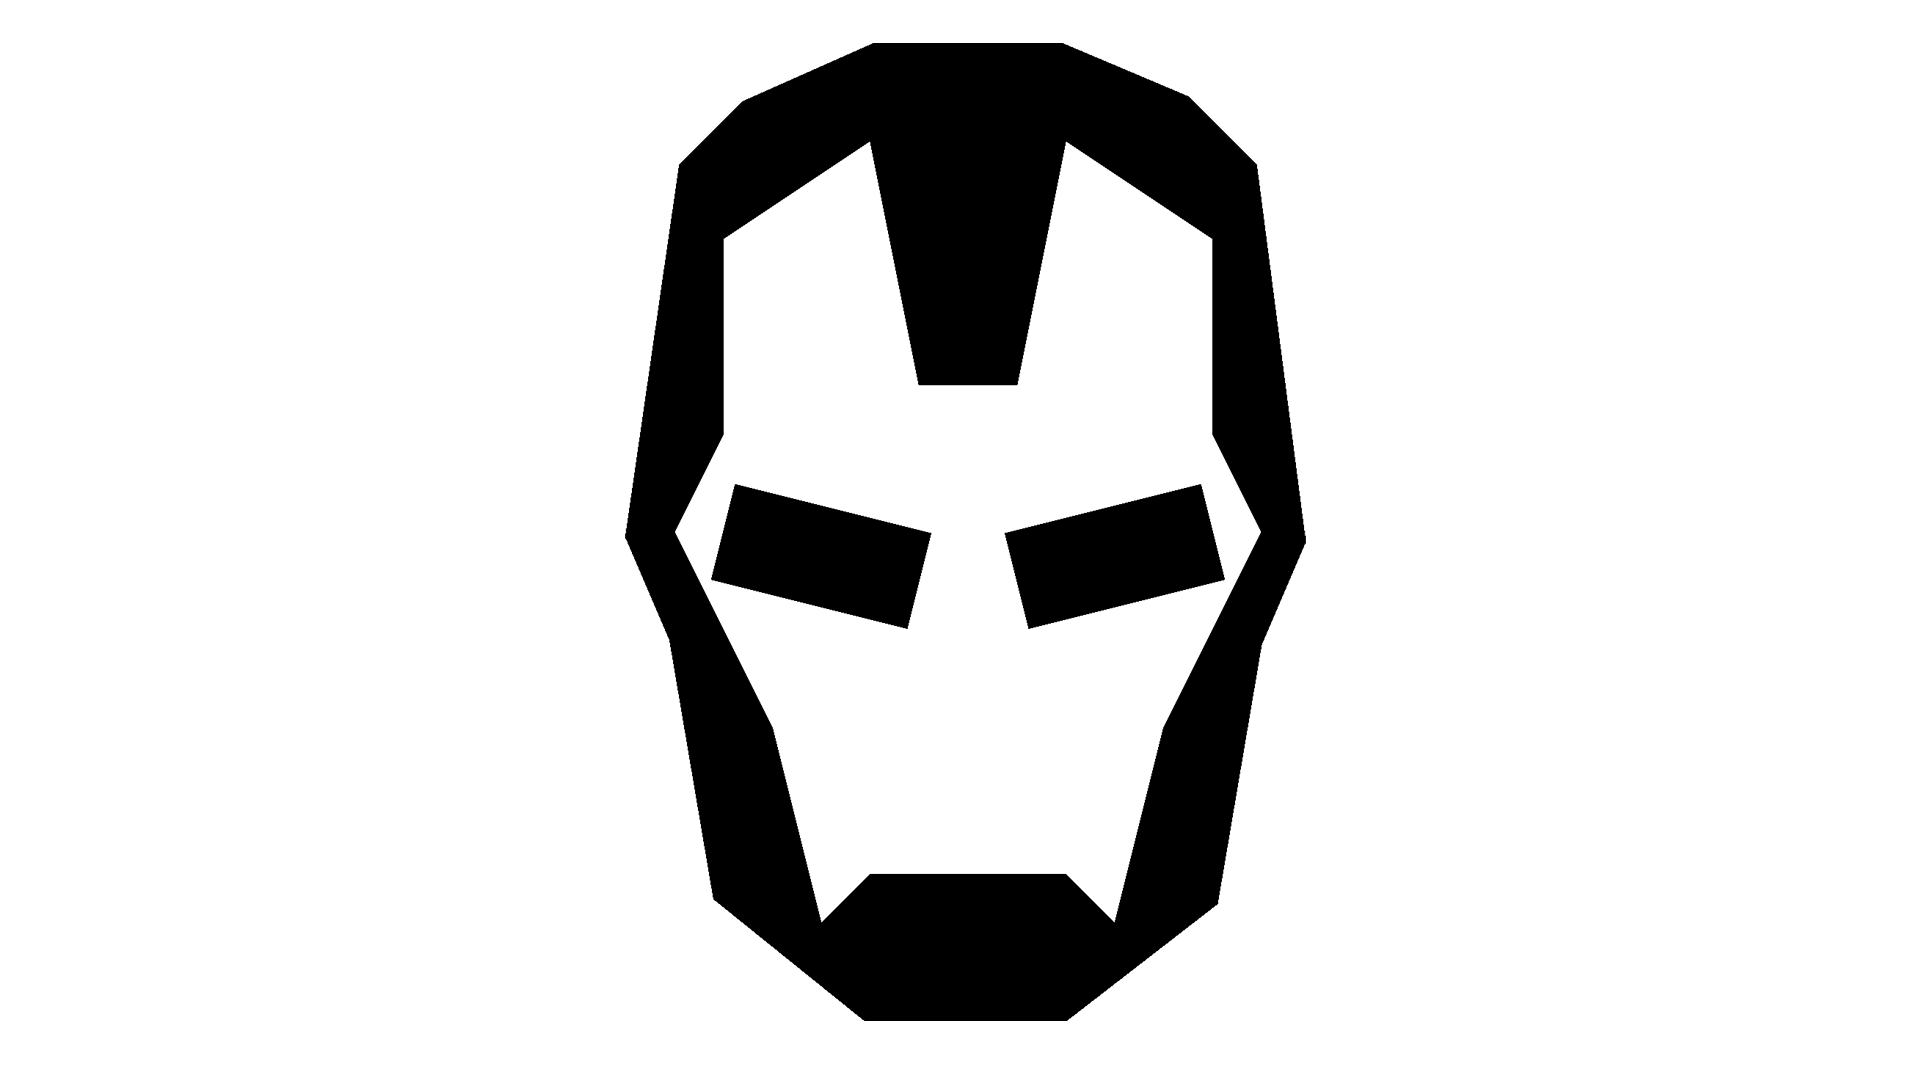 Ironman Logo - Meaning Iron Man logo and symbol | history and evolution